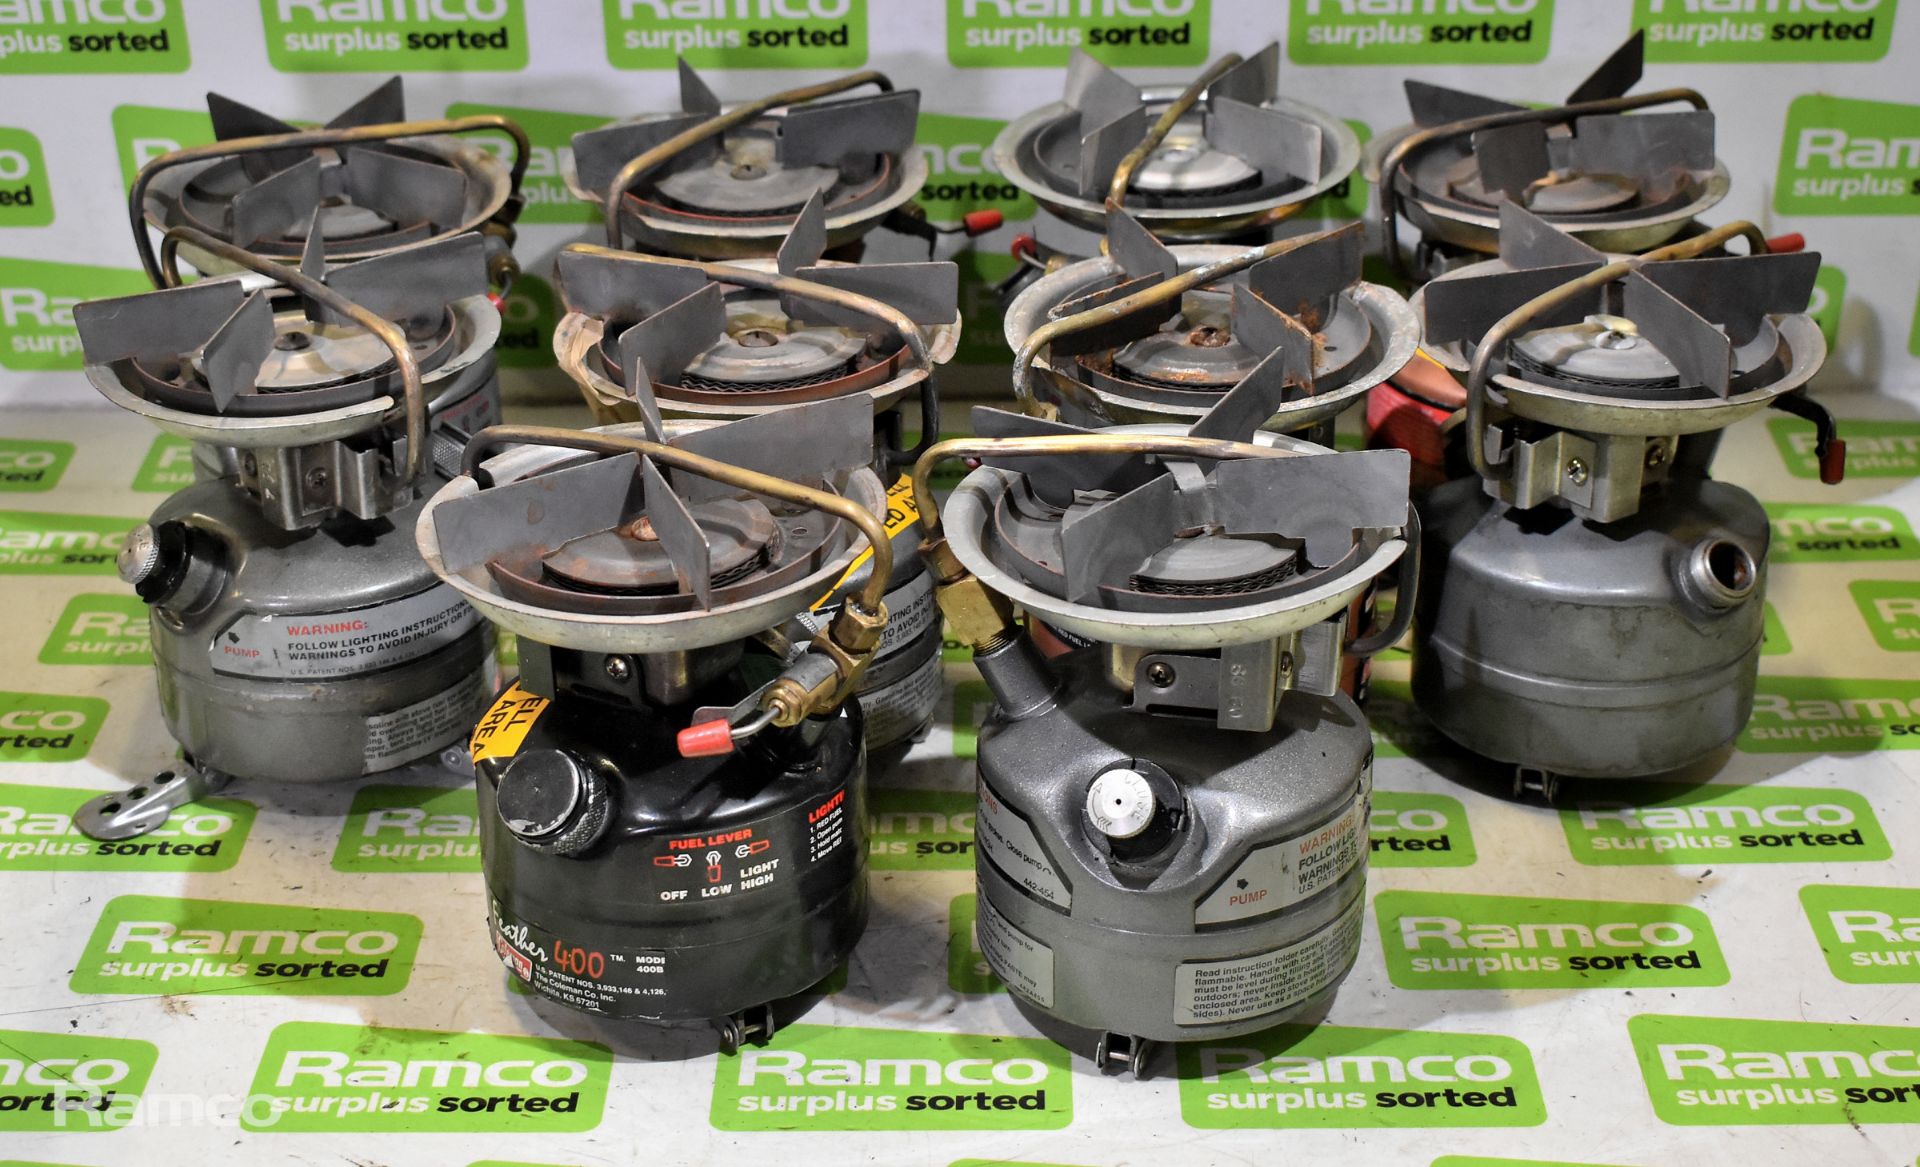 10x Coleman mini dual fuel stoves - see pictures for models & types